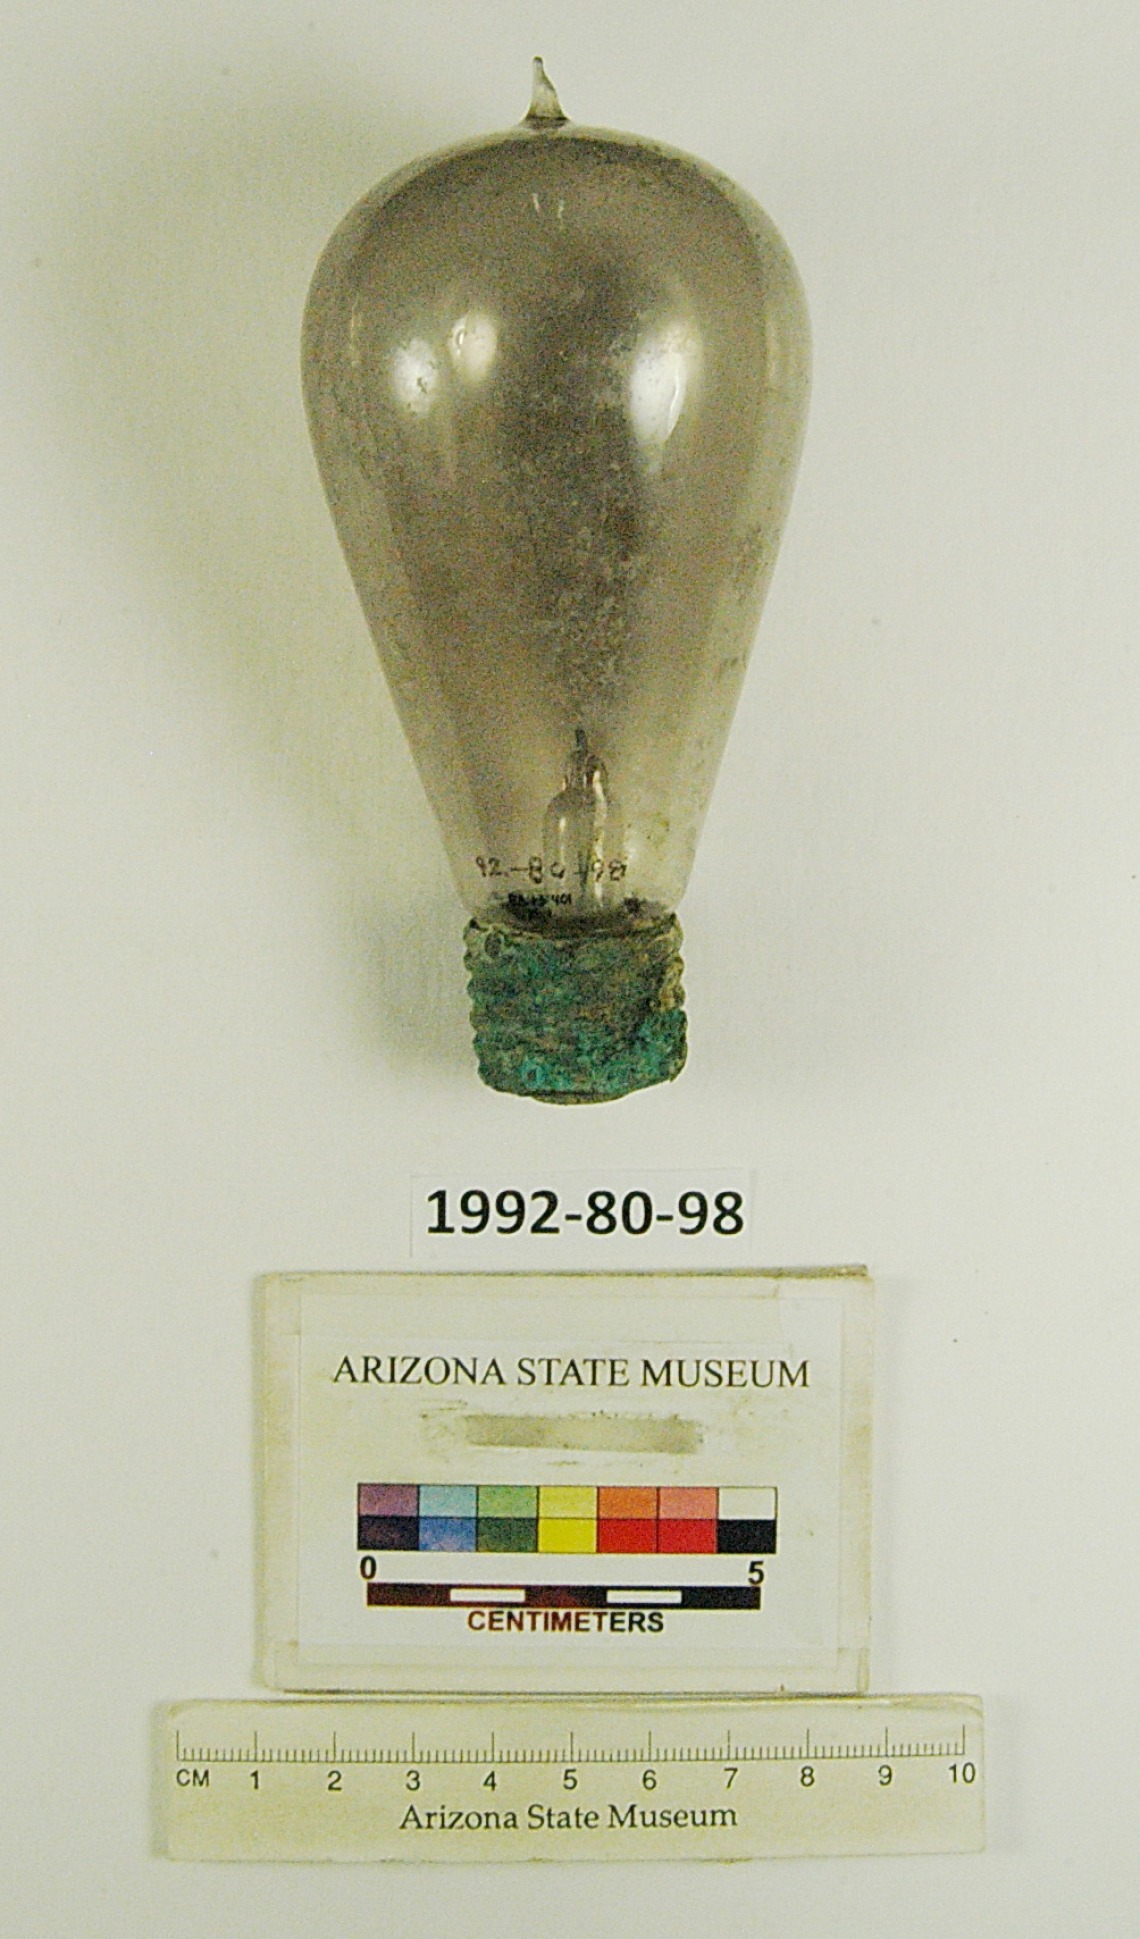 Intact light bulb with carbon filament 